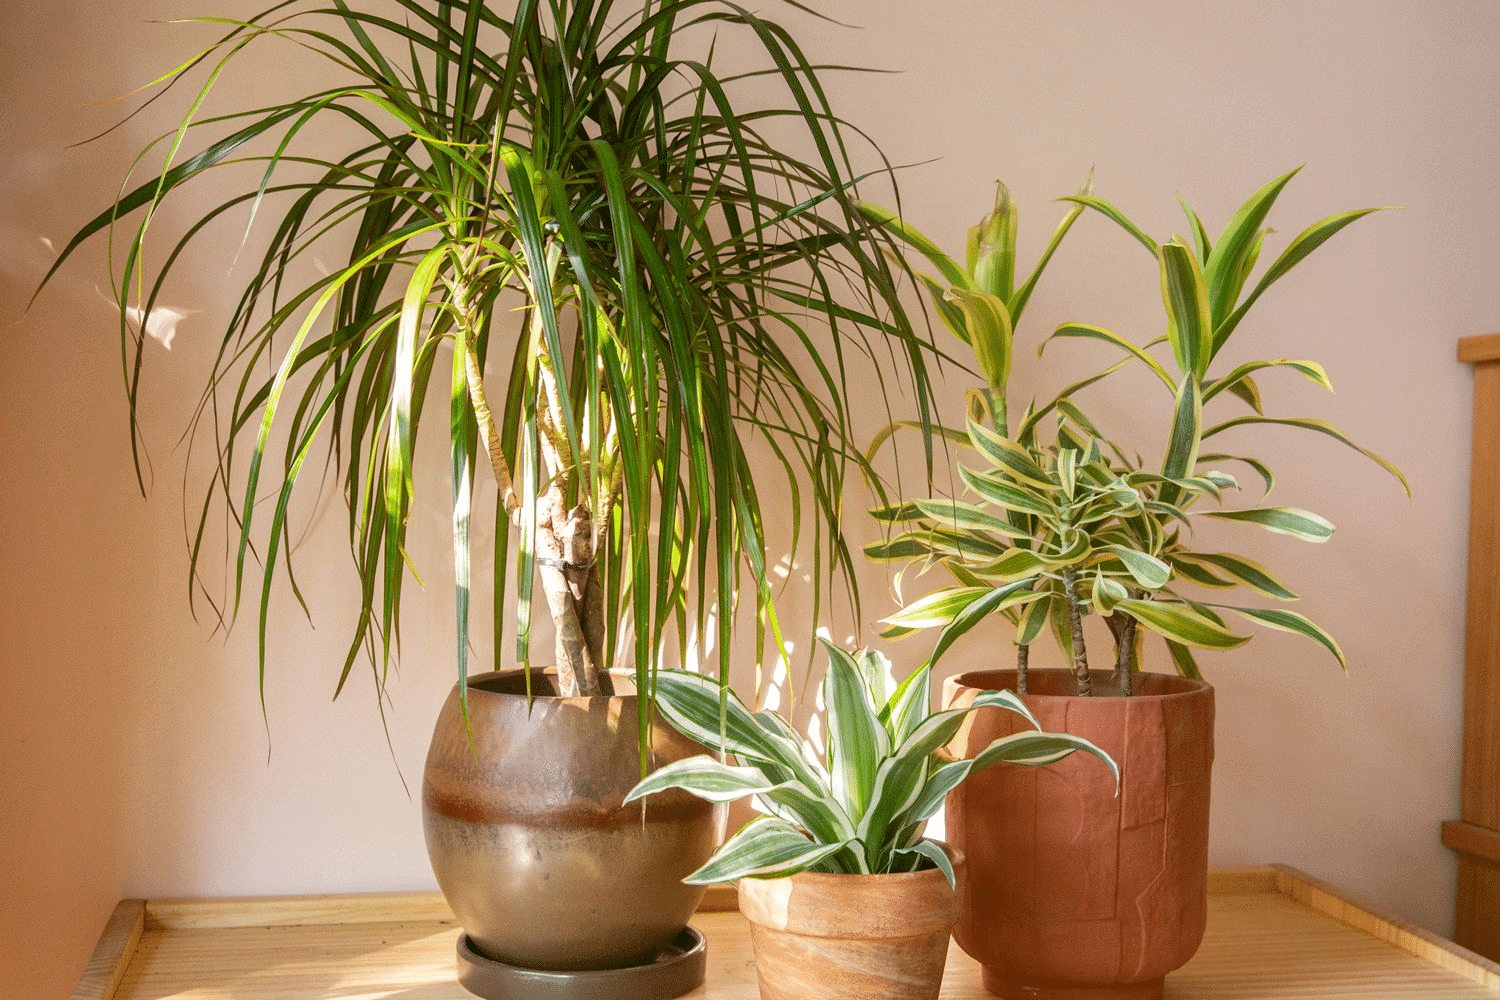 A picture of a variety of dracaena plants with dark green leaves